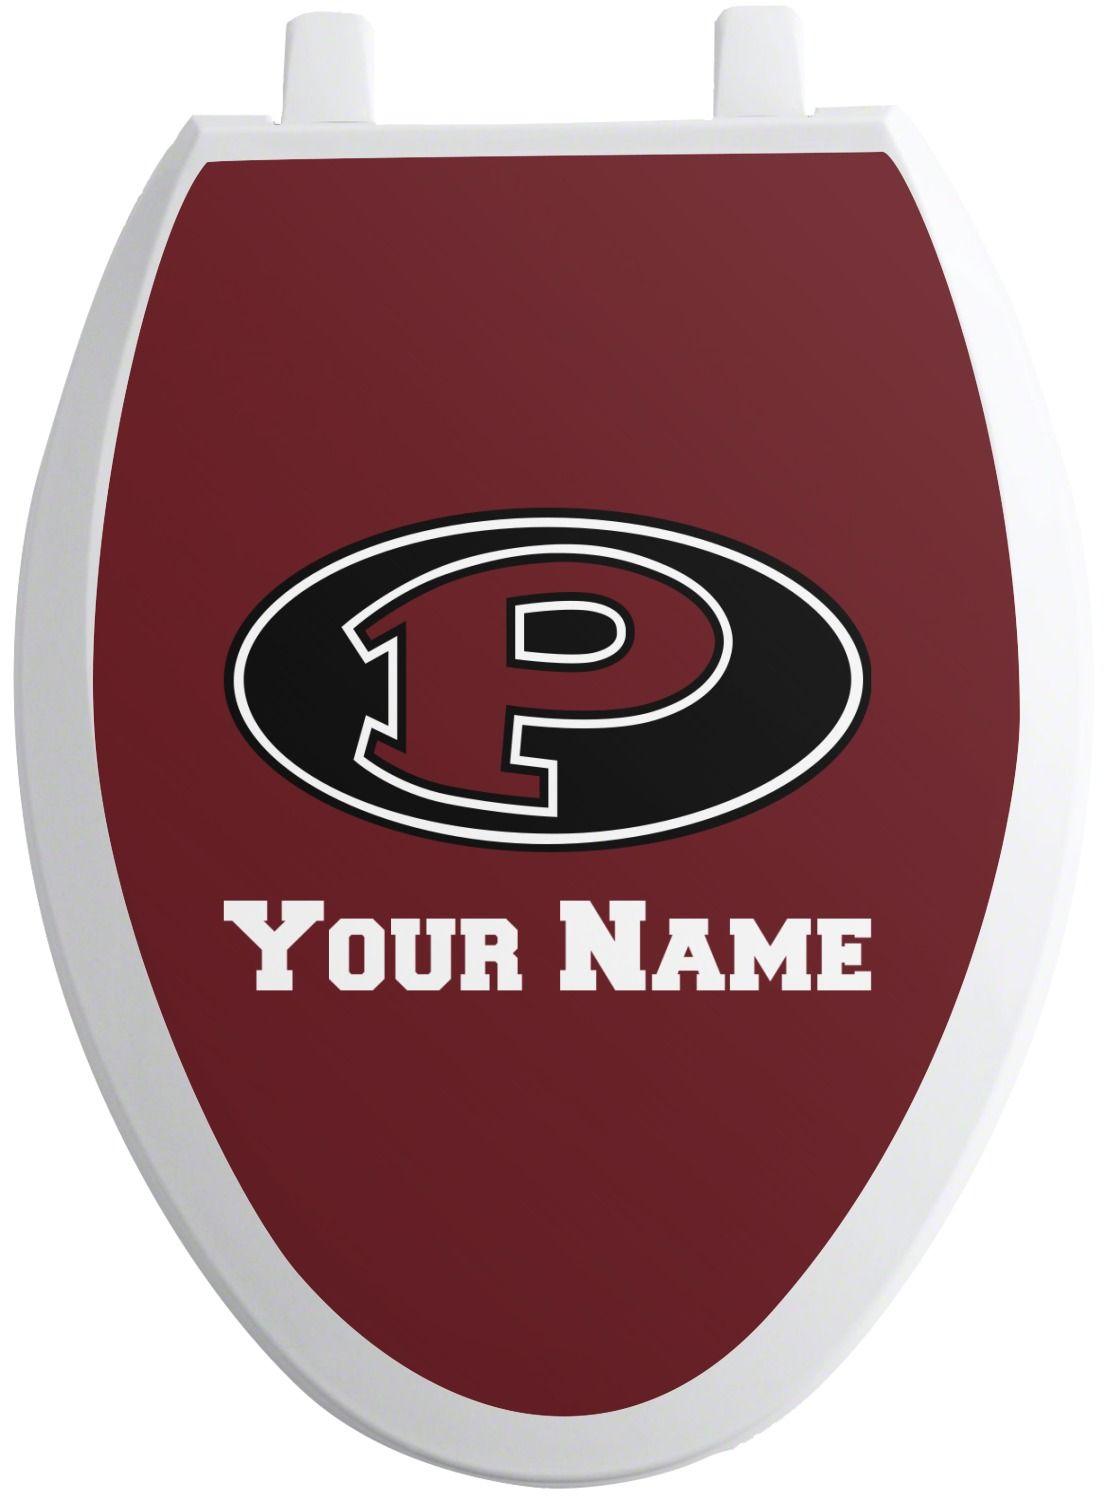 Elongated Red P Logo - Pearland Oilers 